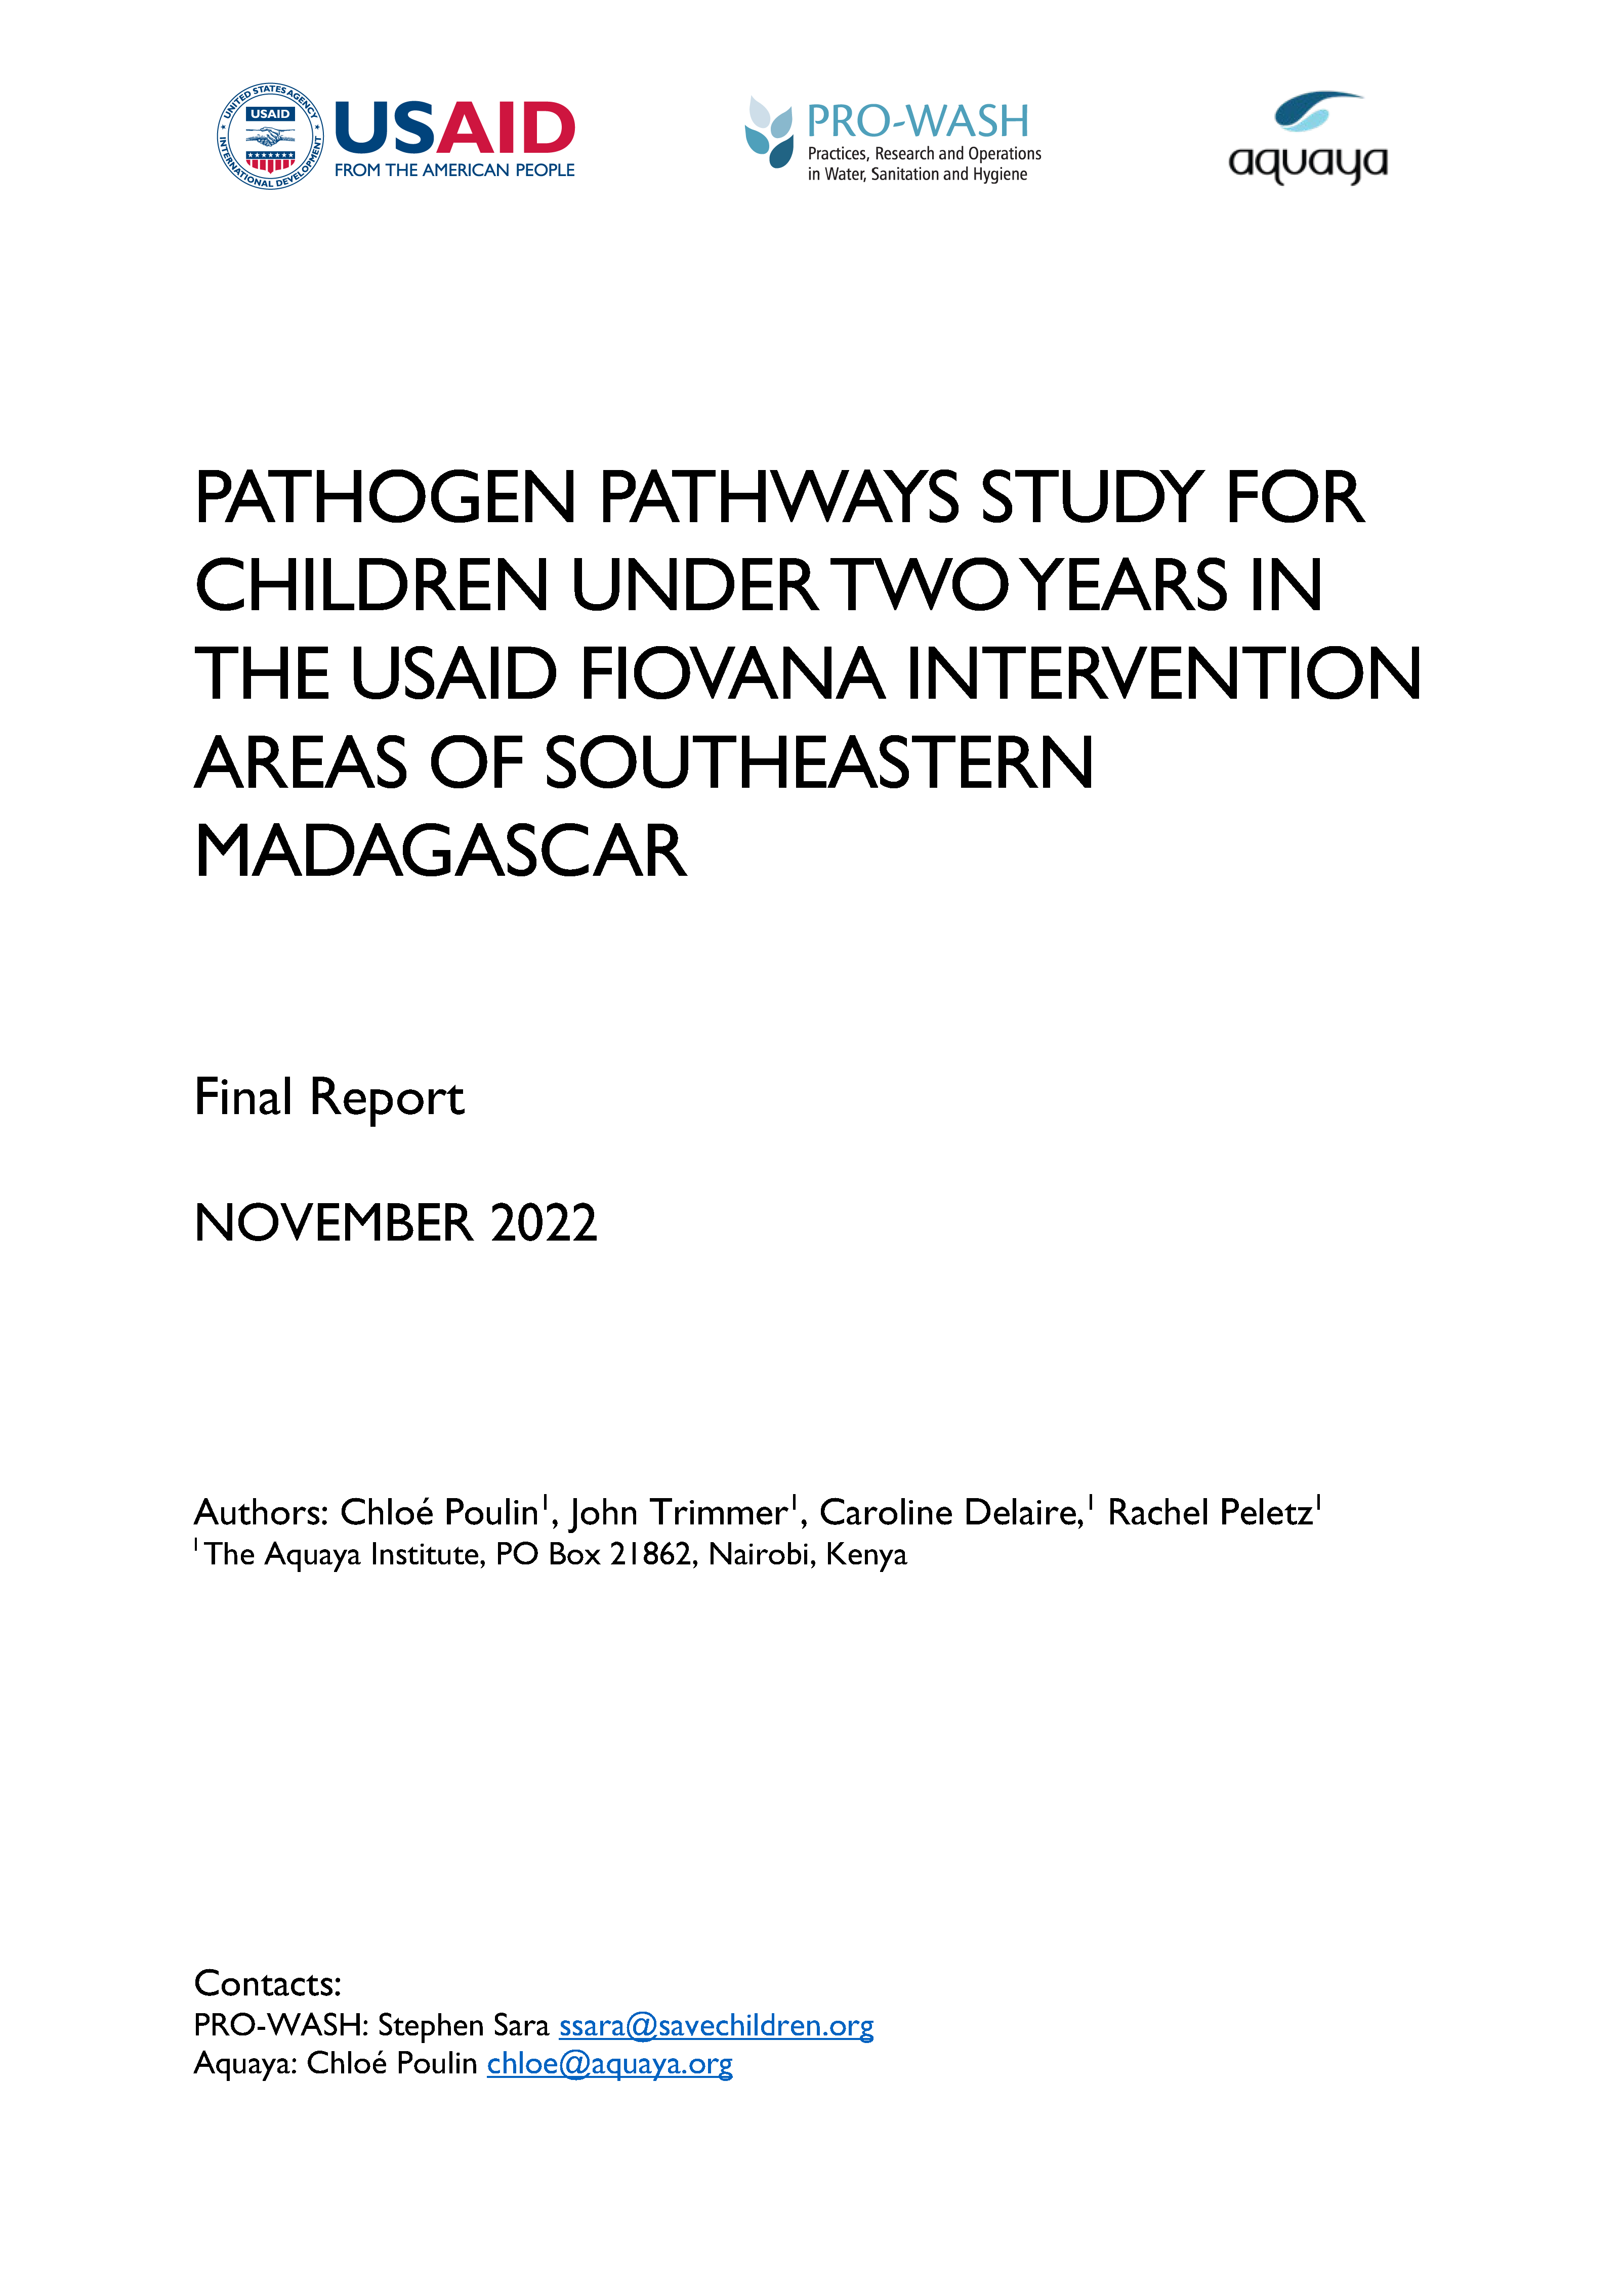 Cover page for Pathogen Pathways Study for Children Under Two Years in the USAID FIOVANA Intervention Areas of Southeastern Madagascar